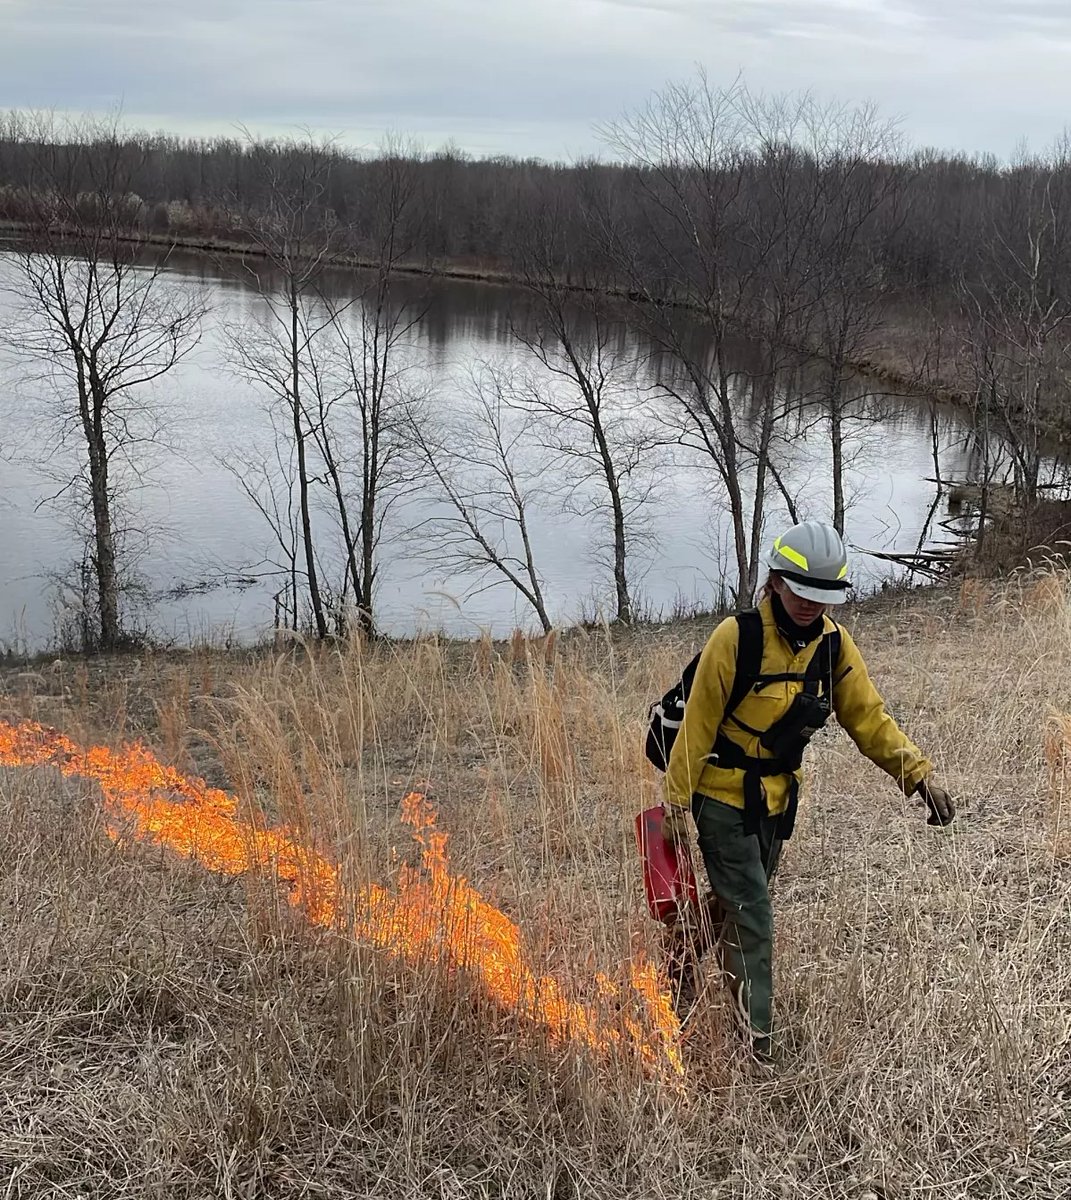 It's World Migratory Bird Day #WMBD2023 and #RxFire can benefit migratory birds. One biologist turned wildland firefighter at Big Oaks National Wildlife Refuge shares her story about using prescribed fire to protect birds and other species. fws.gov/story/it-start…